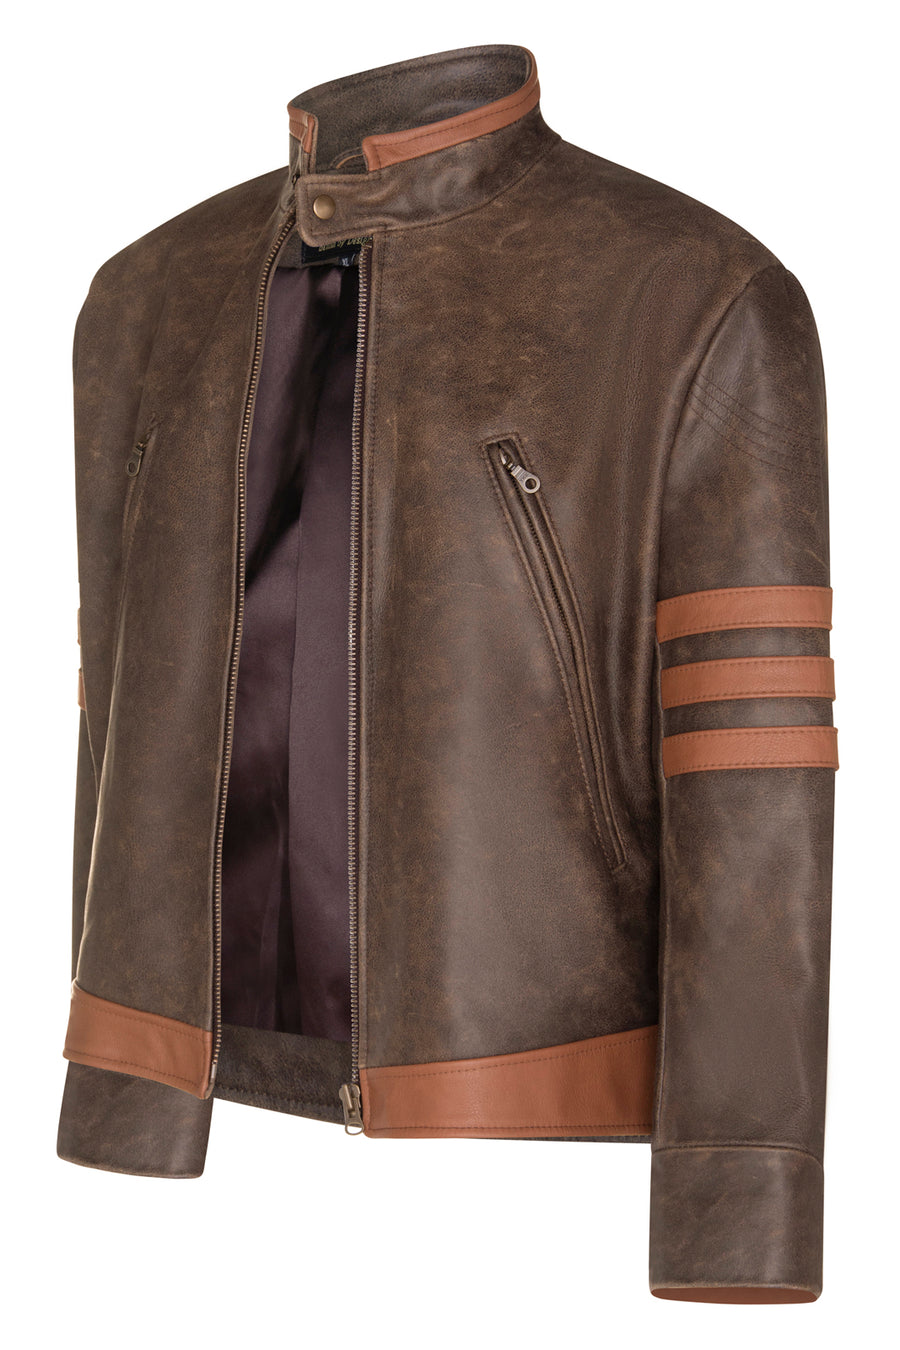 Custom Made Only - The Destiny Jacket – Wested Leather Co